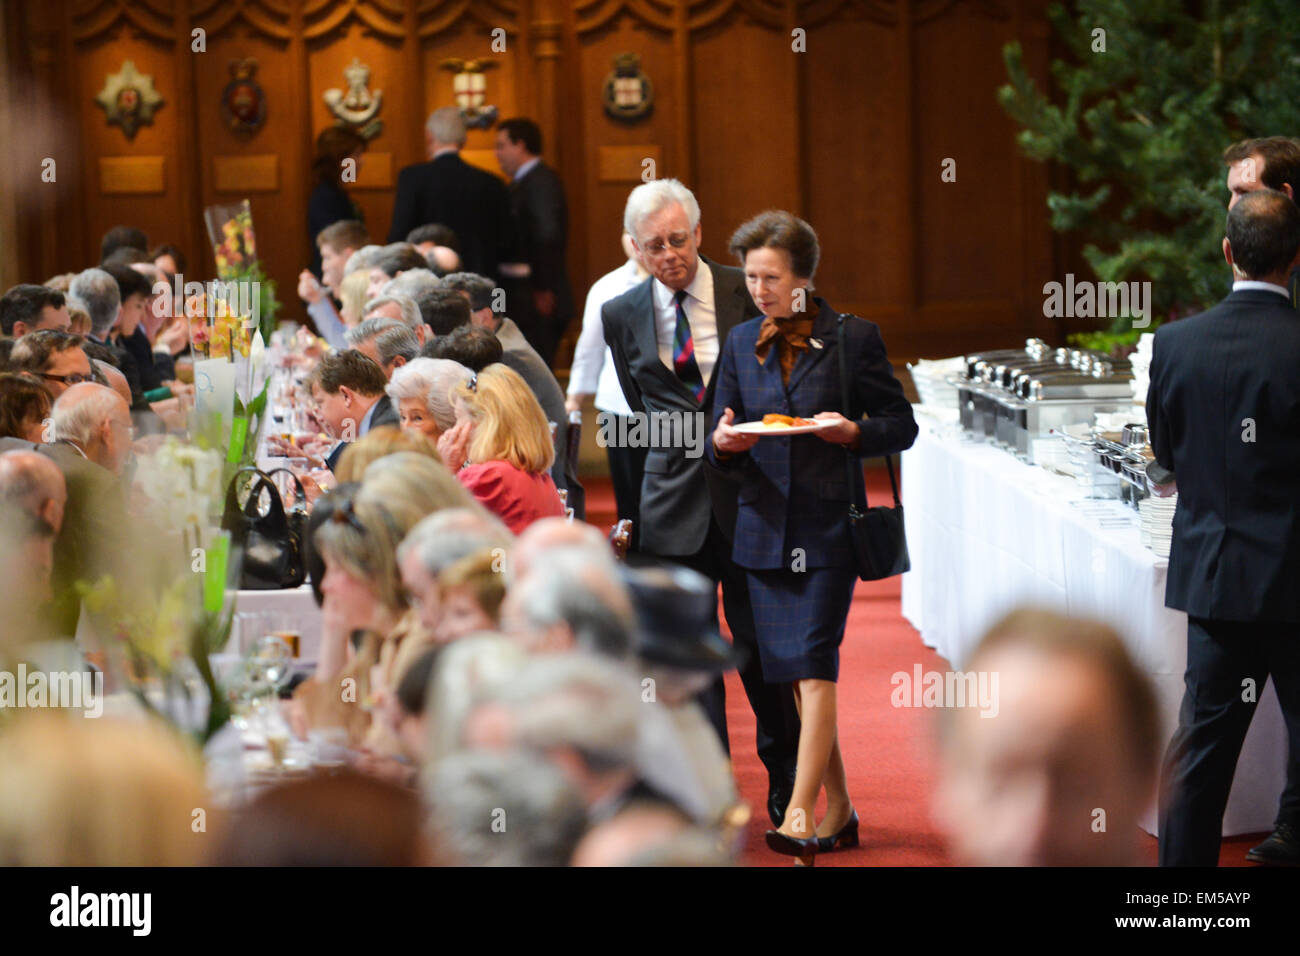 Guildhall, London, UK. 16th April 2015. The Princess Royal, Princess Anne attends the Big Curry Lunch. The Lord Mayor's Big Curry Lunch, in support of ABF The Soldiers Charity. Credit:  Matthew Chattle/Alamy Live News Stock Photo